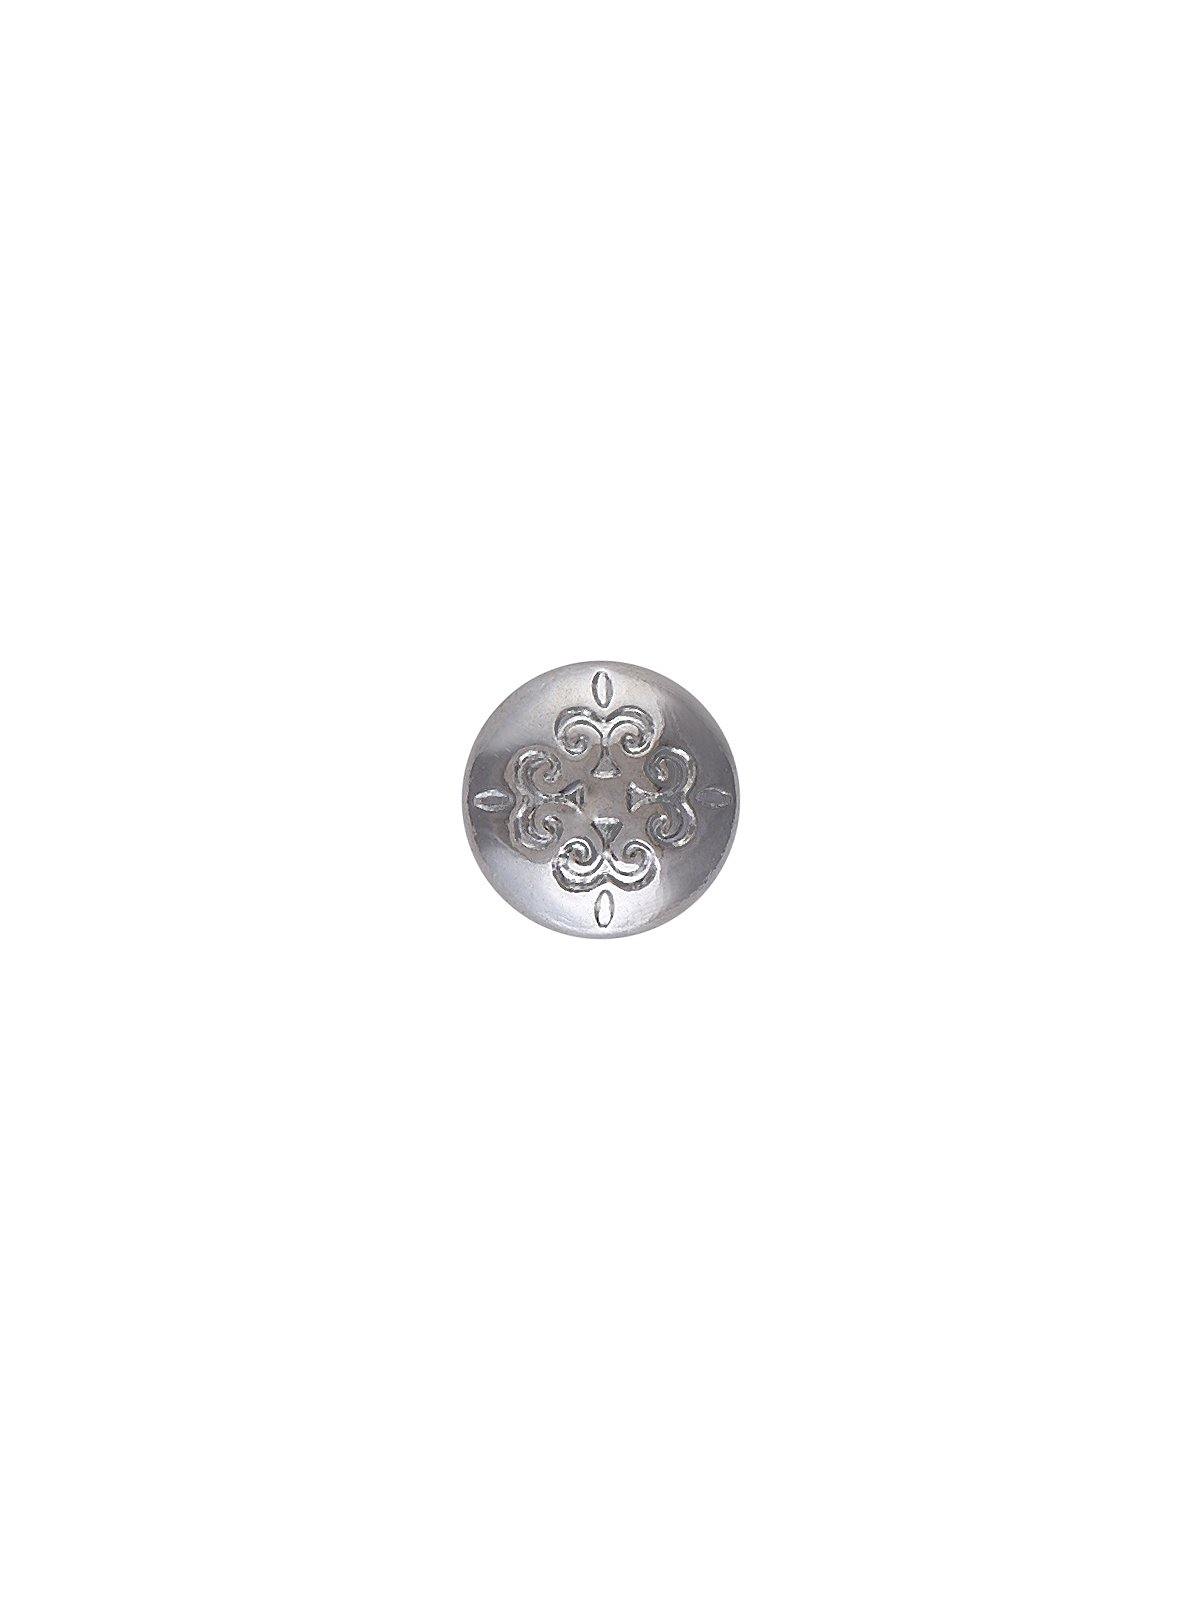 Classic Engraved Design 9mm Downhole Metal Button